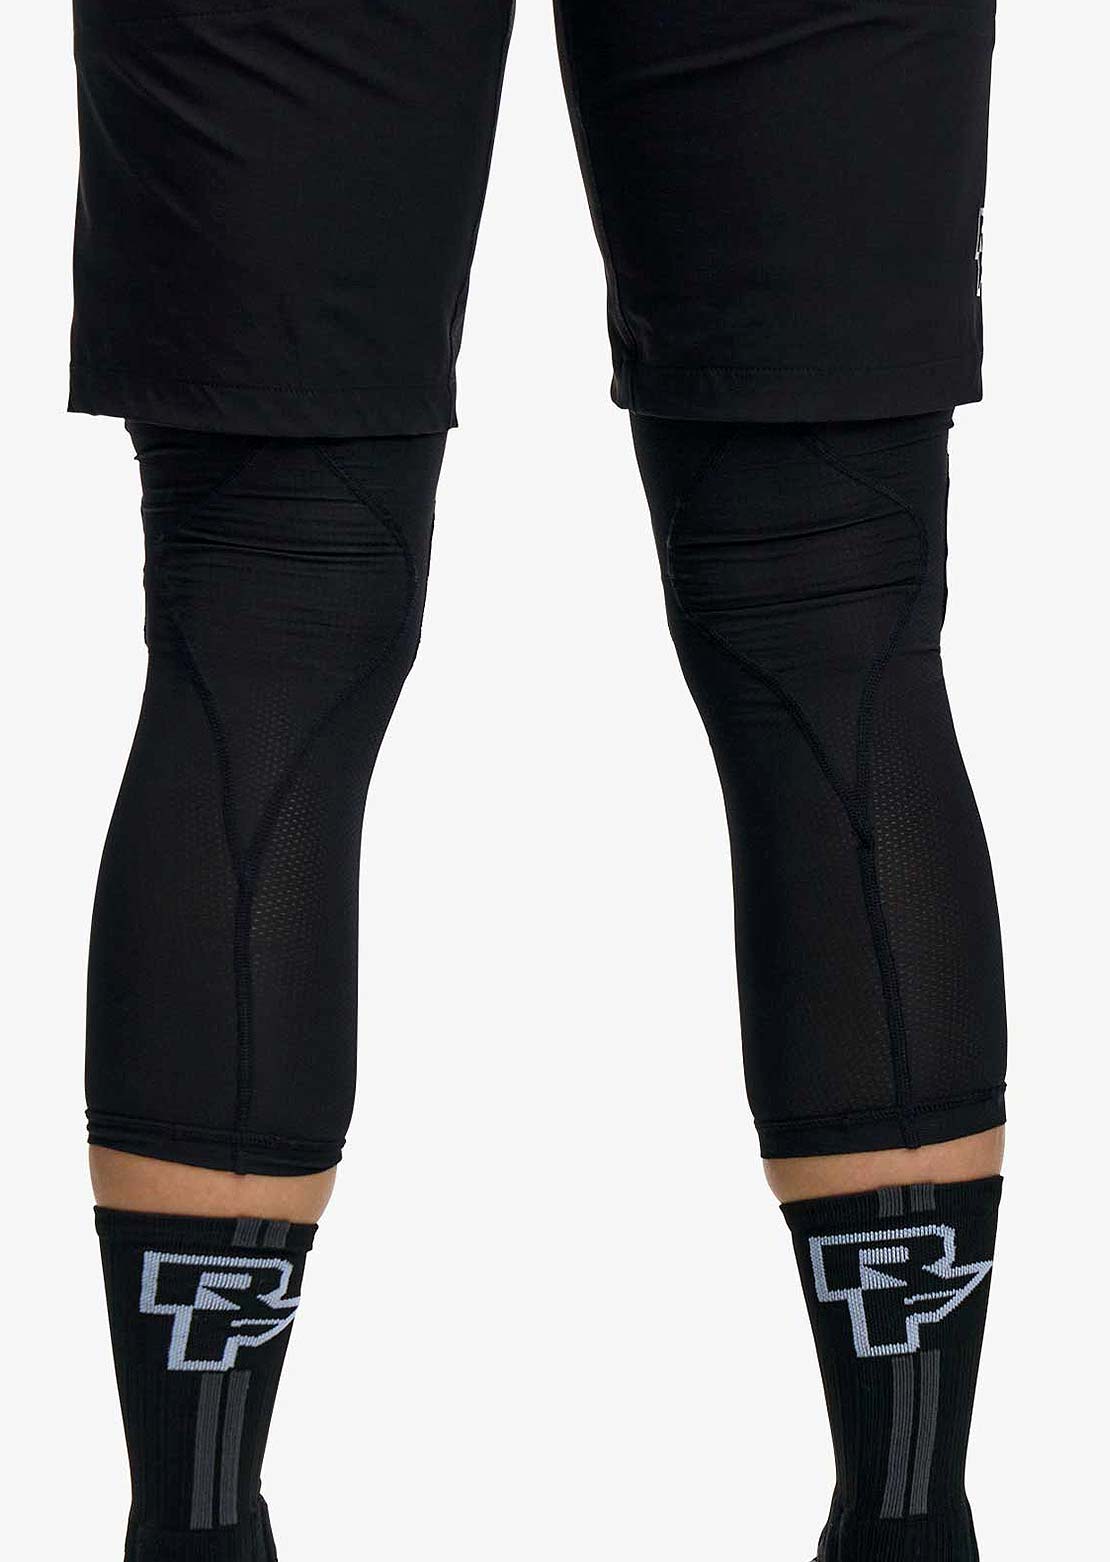 Race Face Charge Knee Guards Stealth